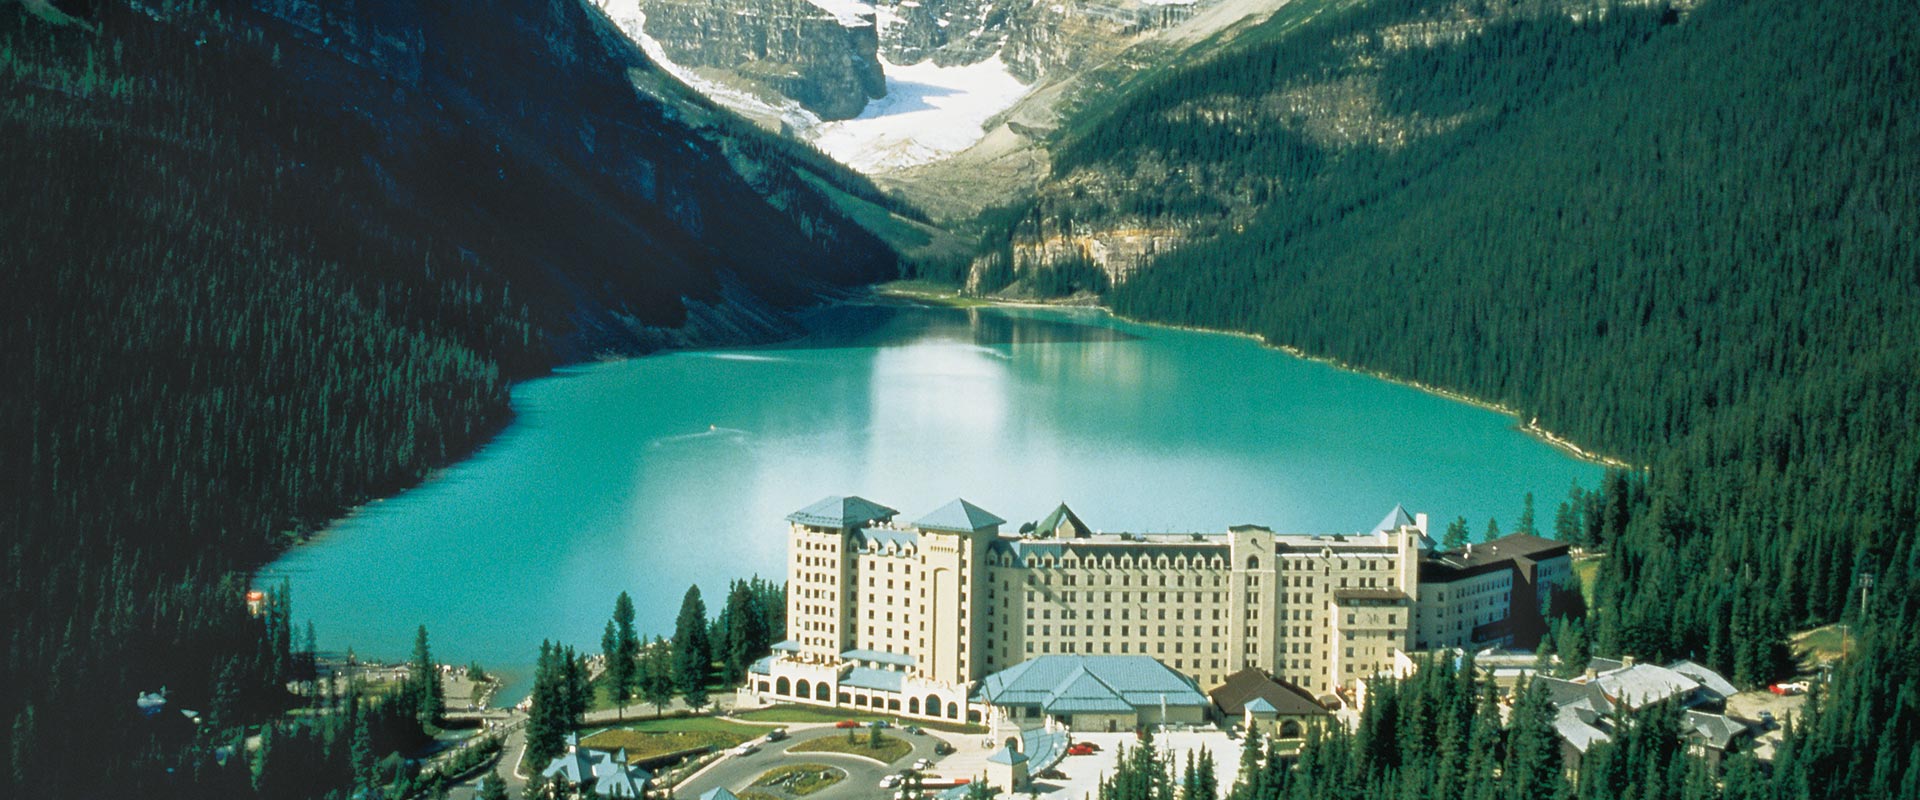 View of Fairmont Chateau Lake Louise in foreground, Canada